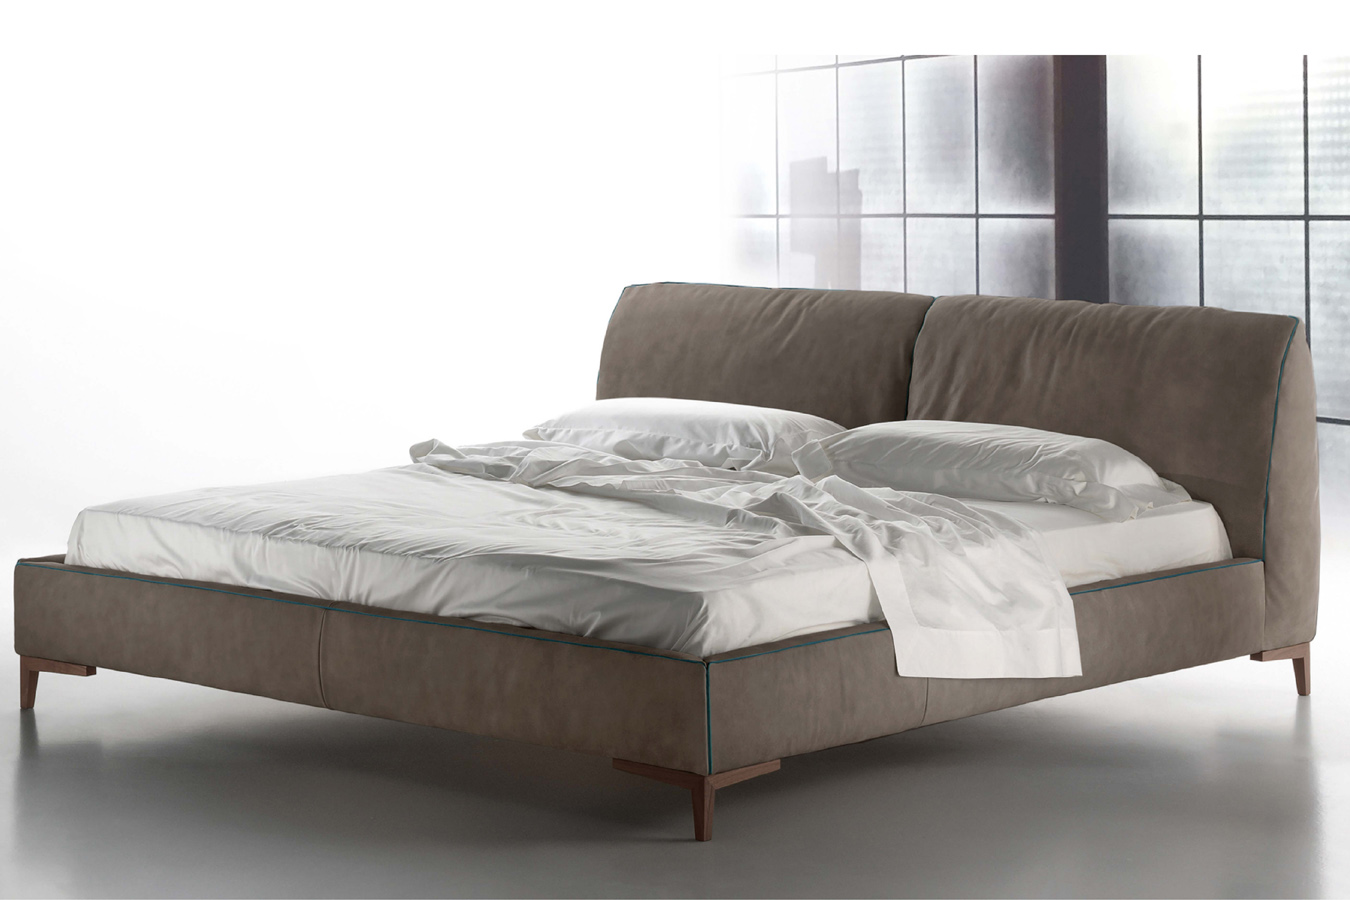 Gamma DHC Beds Kong Night 01 hover